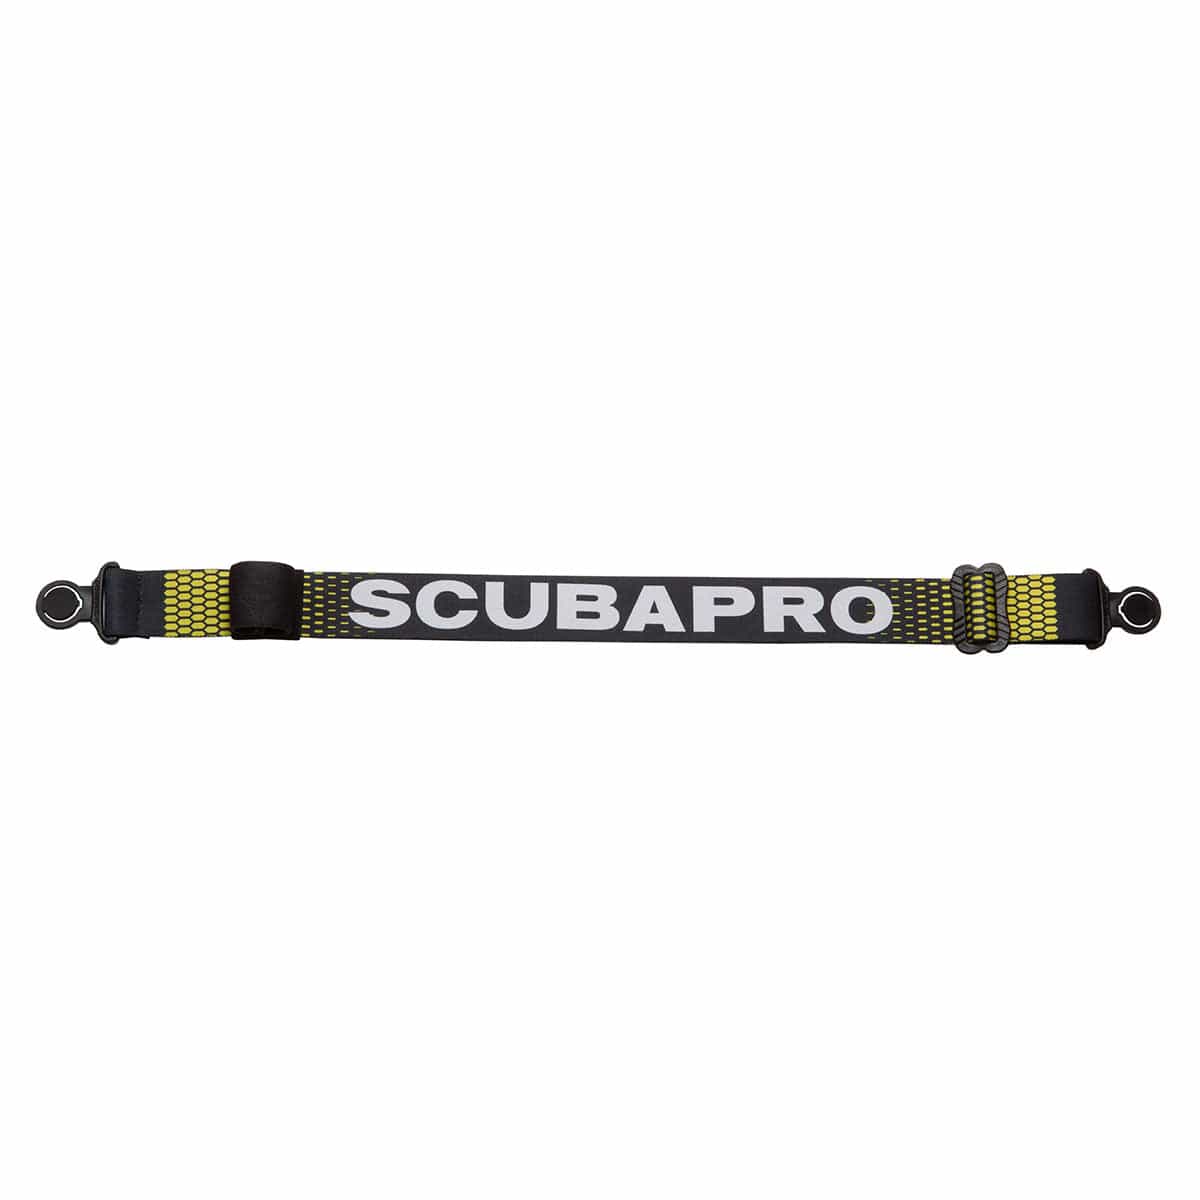 Scubapro Comfort Strap - Turquoise - 24.730.020-NED - 21